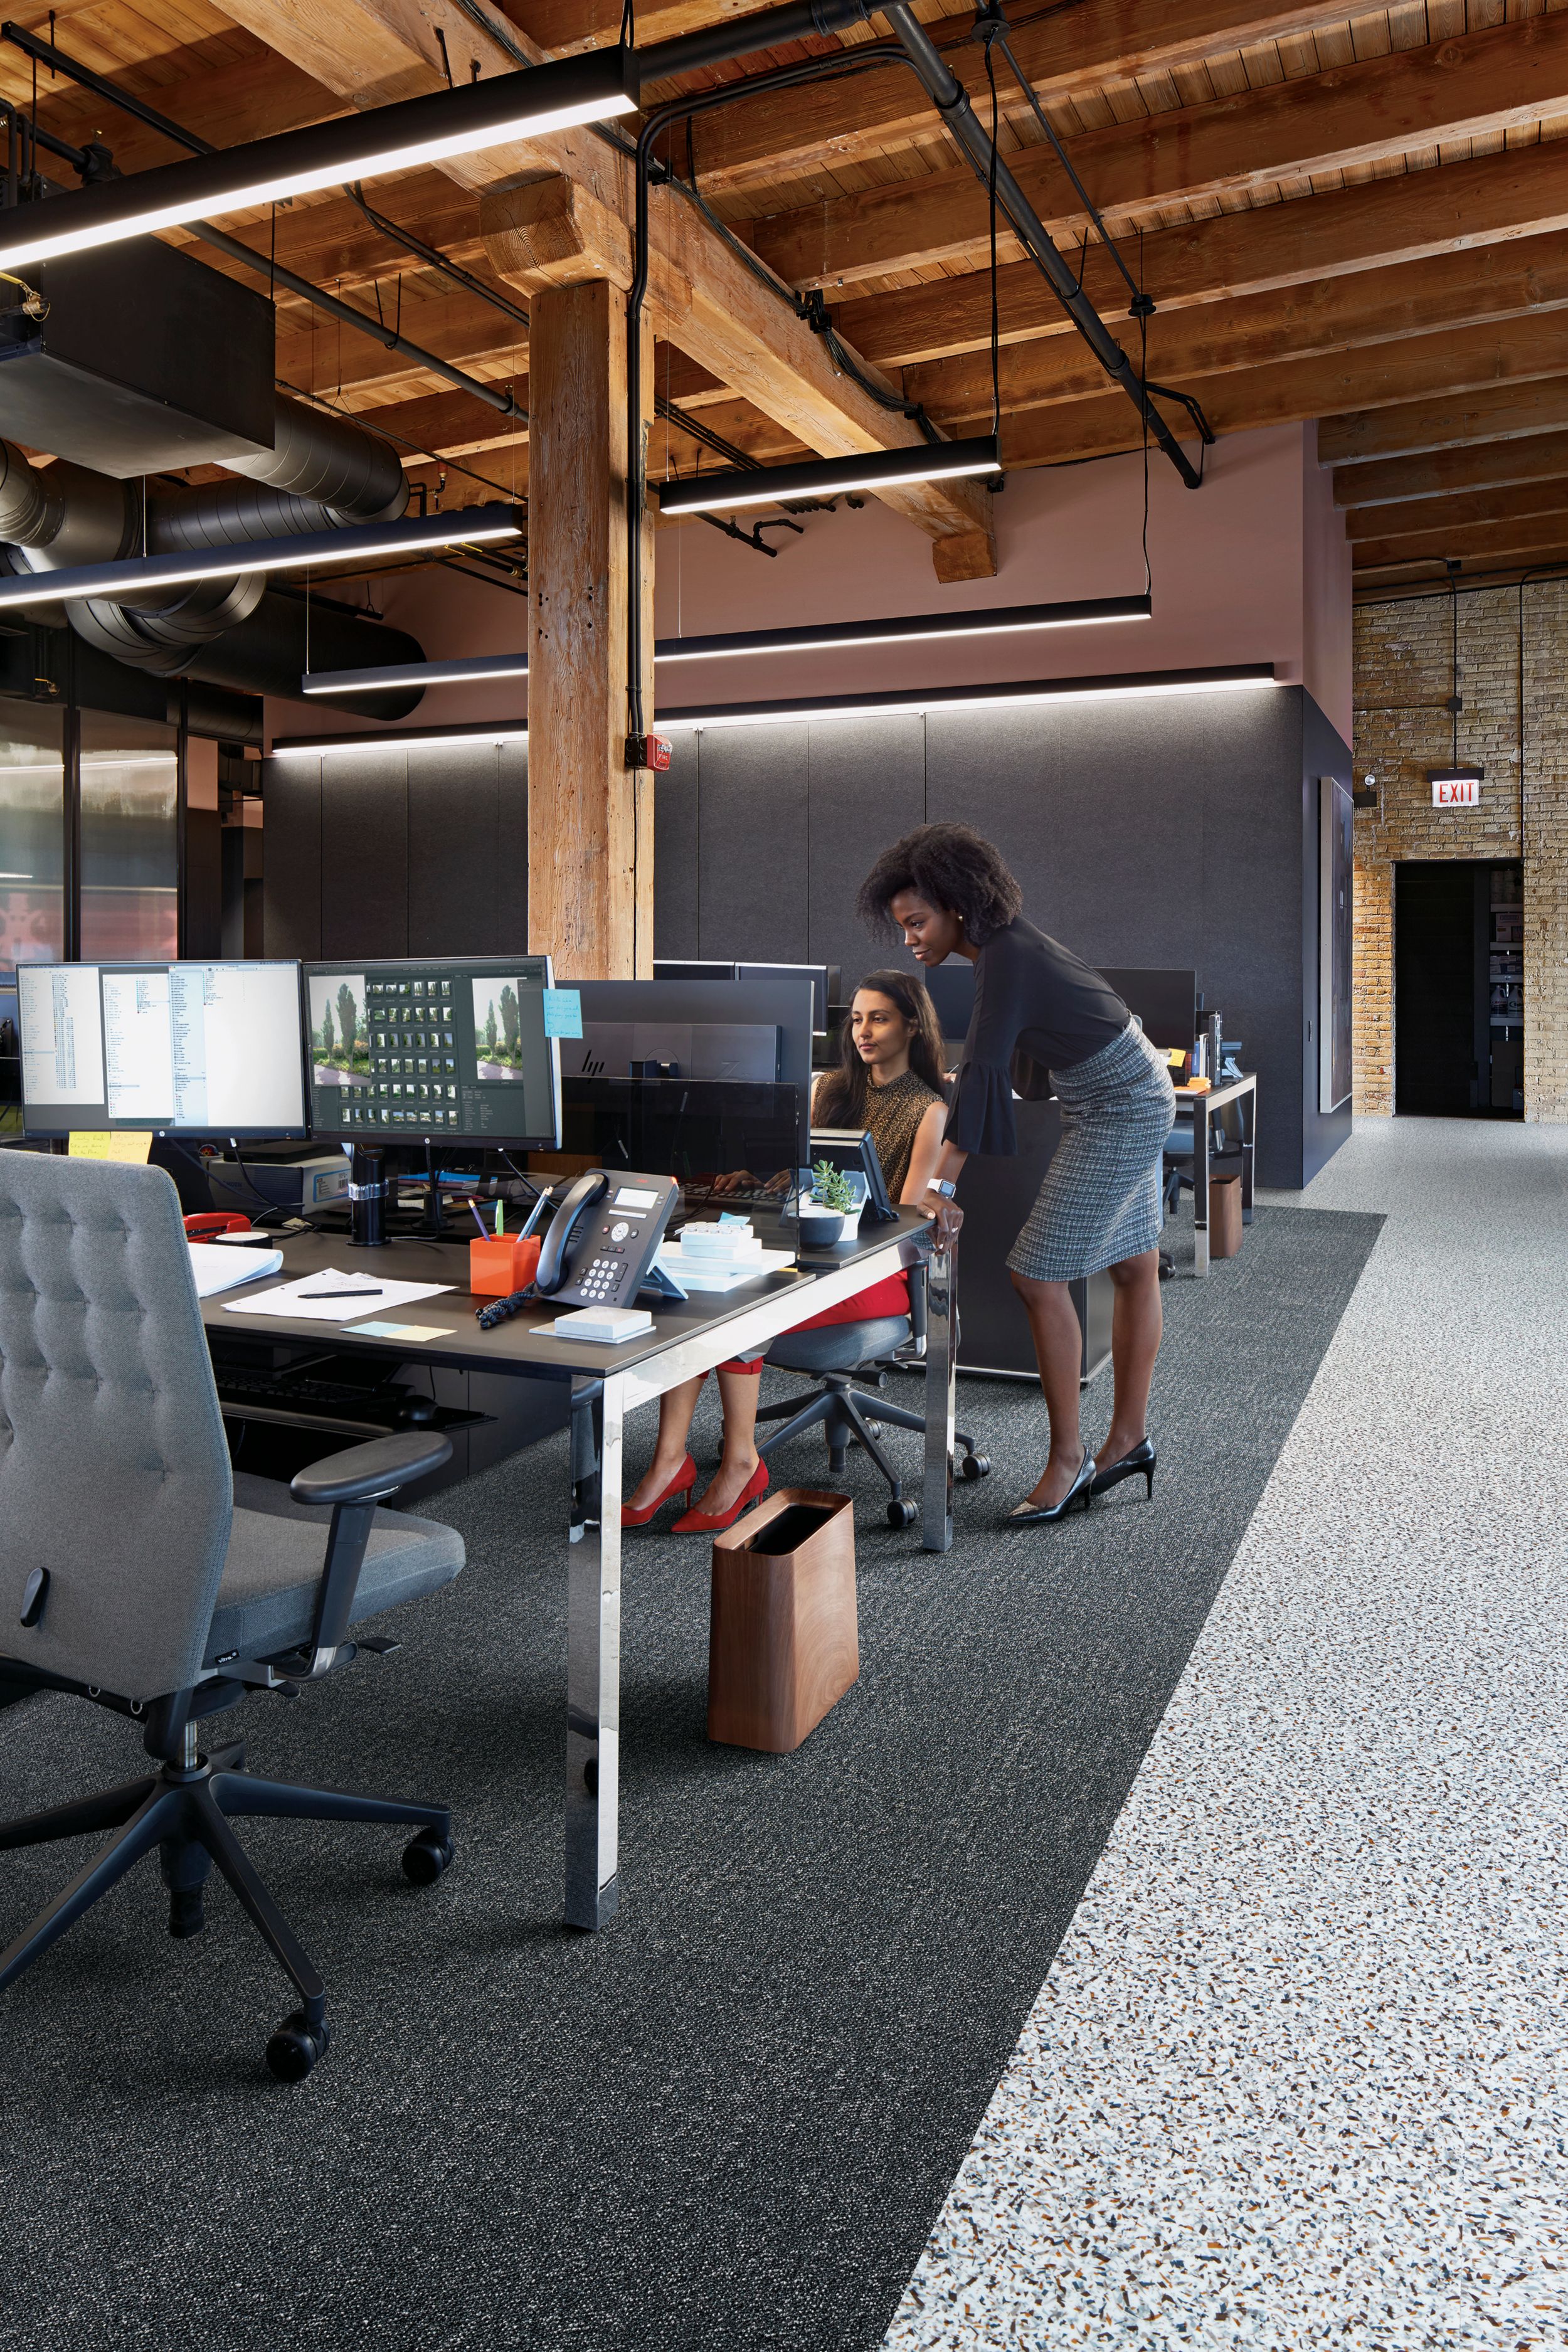 Interface Step it Up and Walk on By carpet tile in common work space with two people número de imagen 4